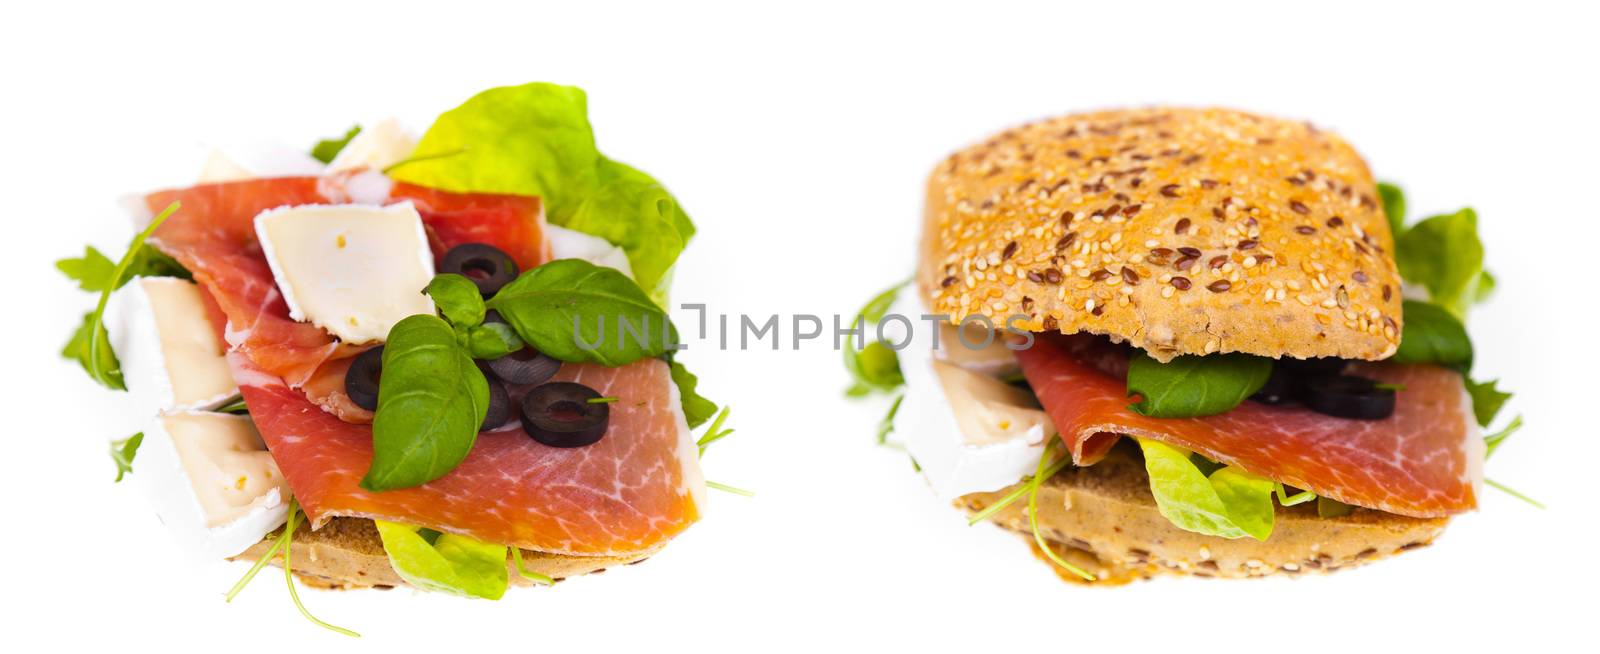 Delicious and healthy sandwich by furzyk73